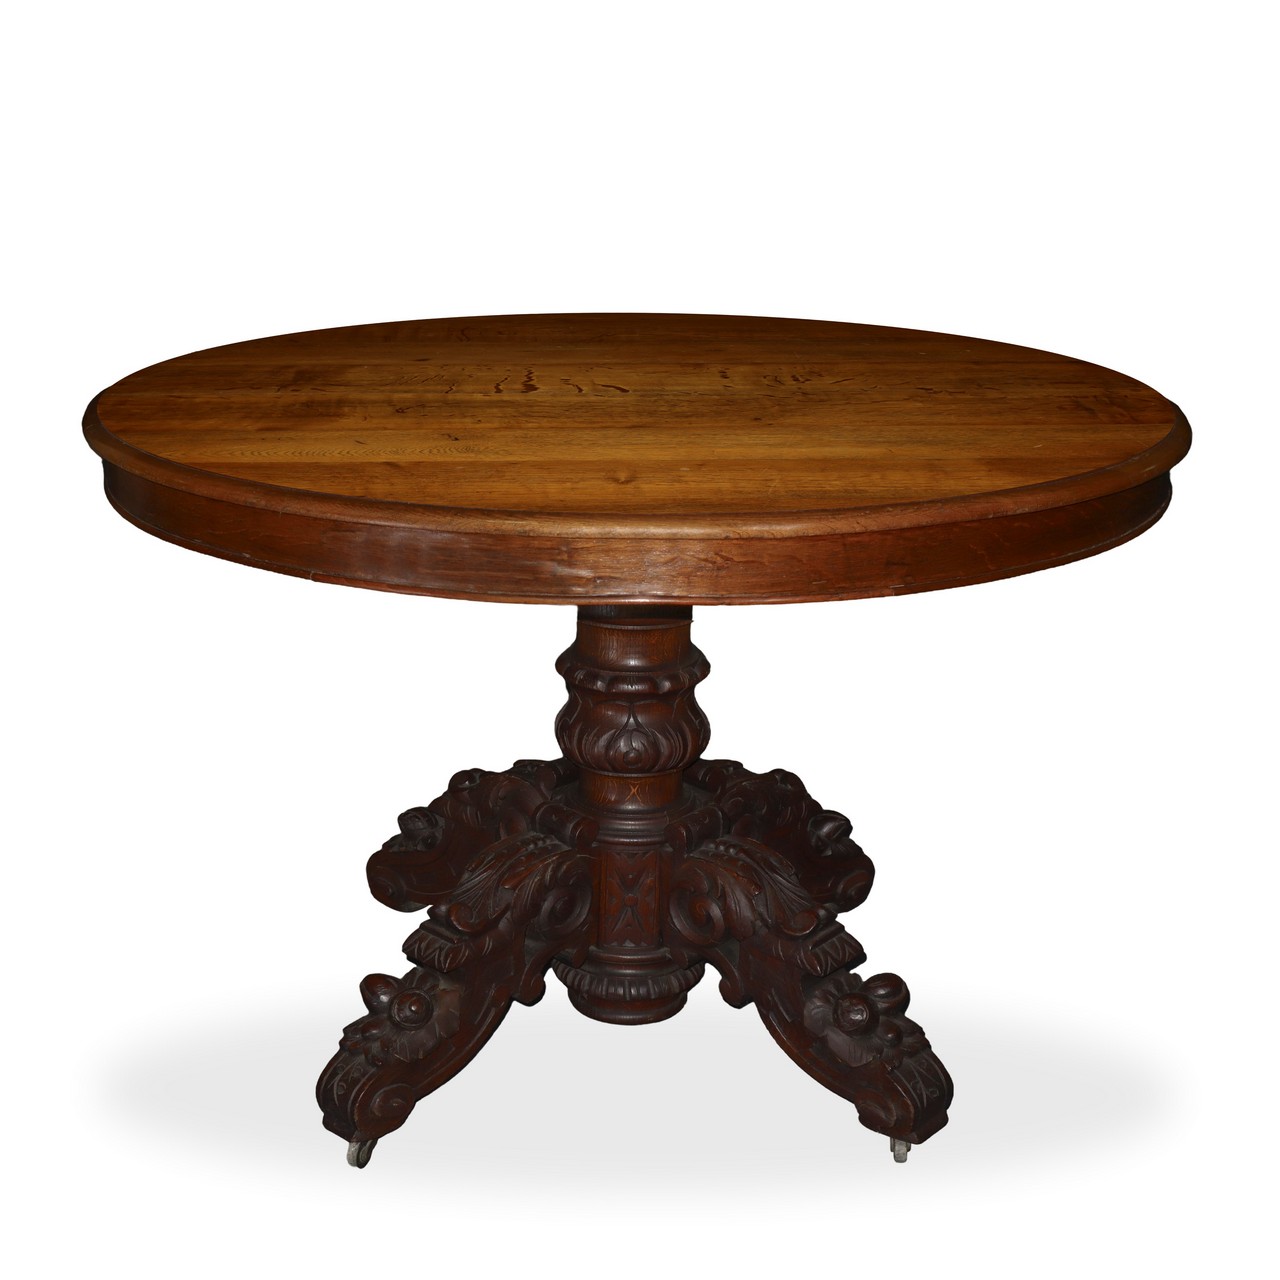 Extendable oval table in walnut with four-spoke foot in sculpted and carved wood, nineteenth century